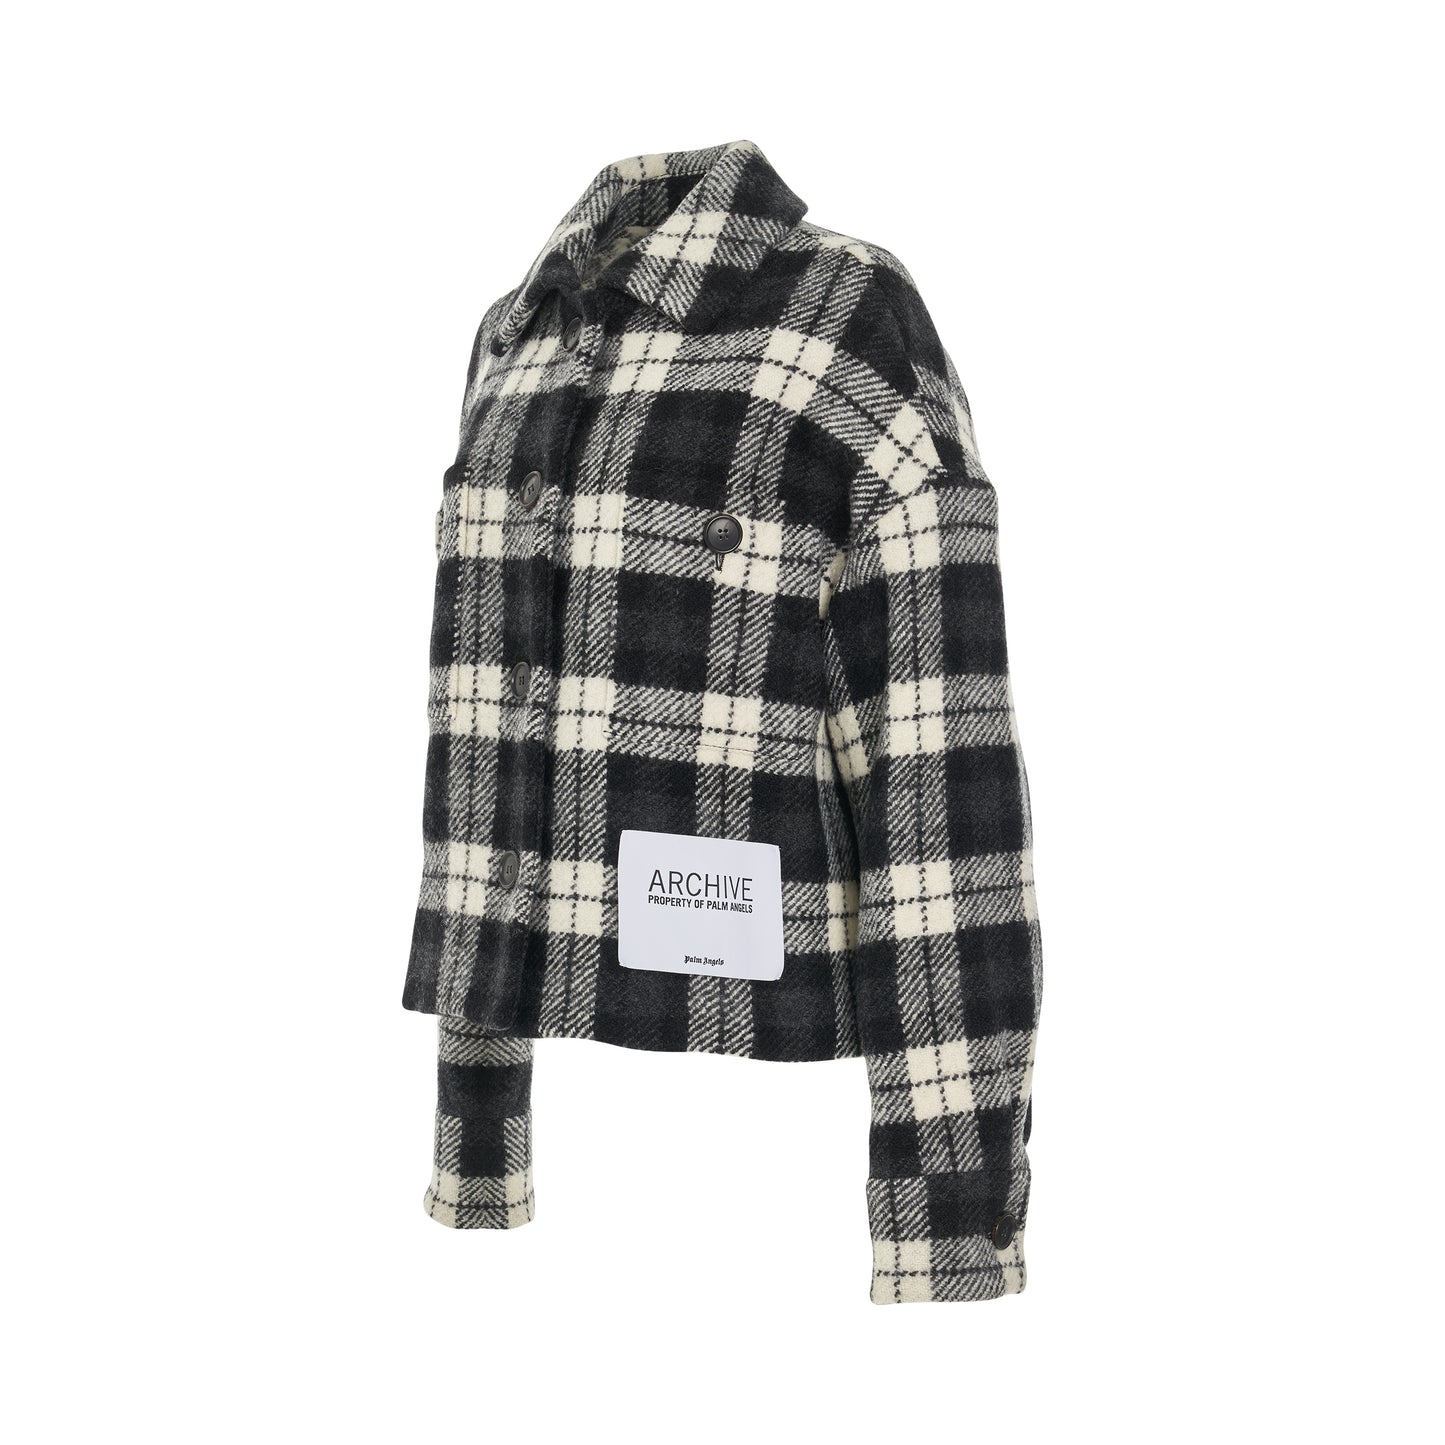 Checked Shirt Jacket in Black